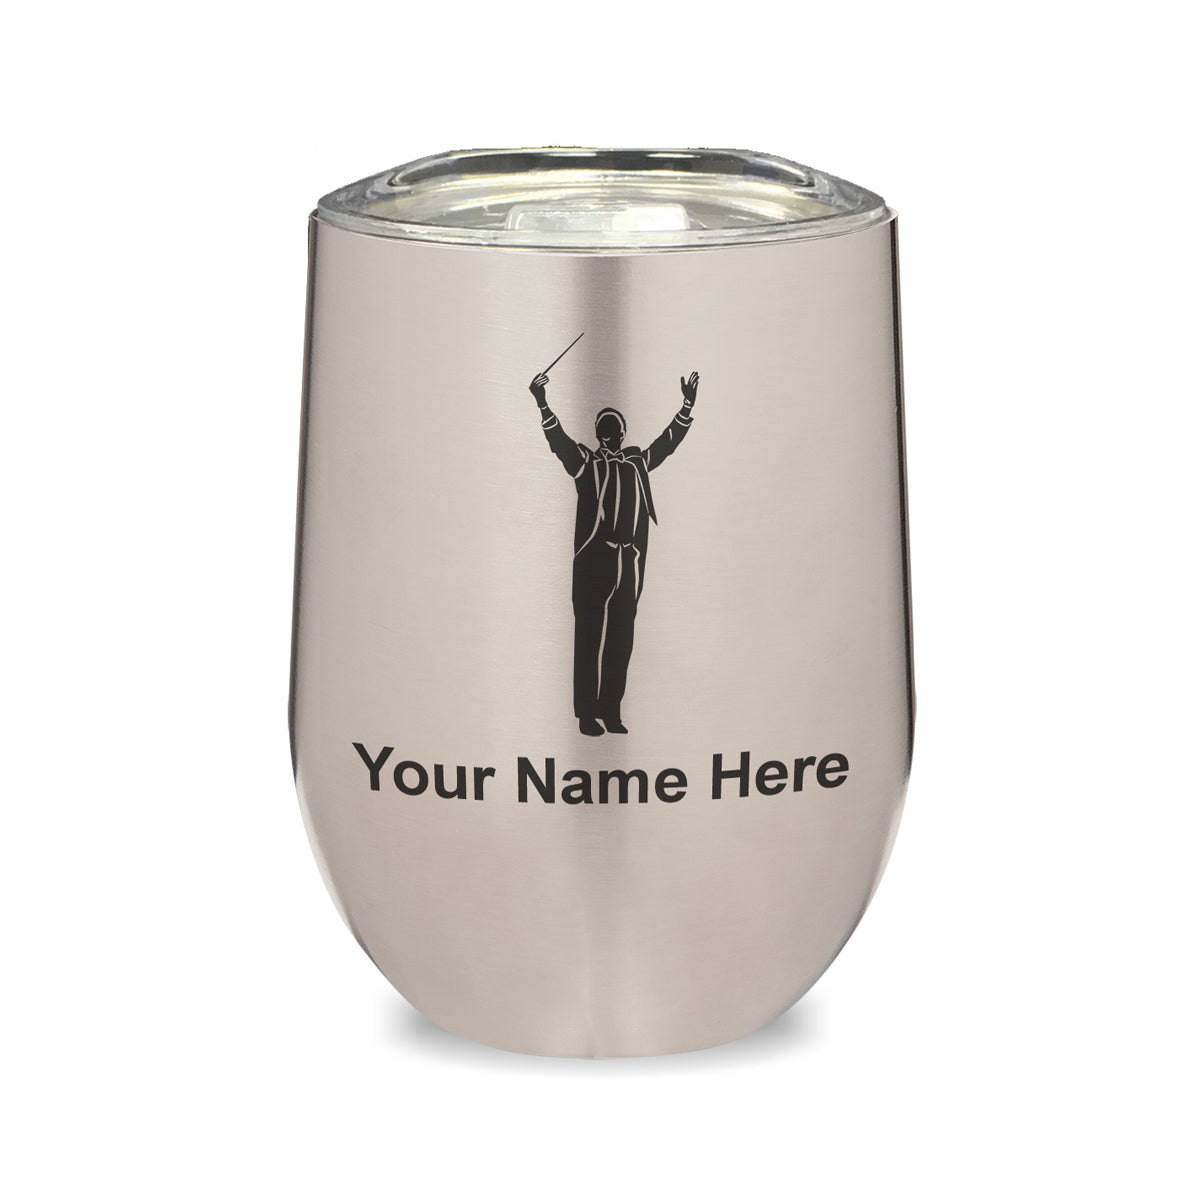 LaserGram Double Wall Stainless Steel Wine Glass, Band Director, Personalized Engraving Included